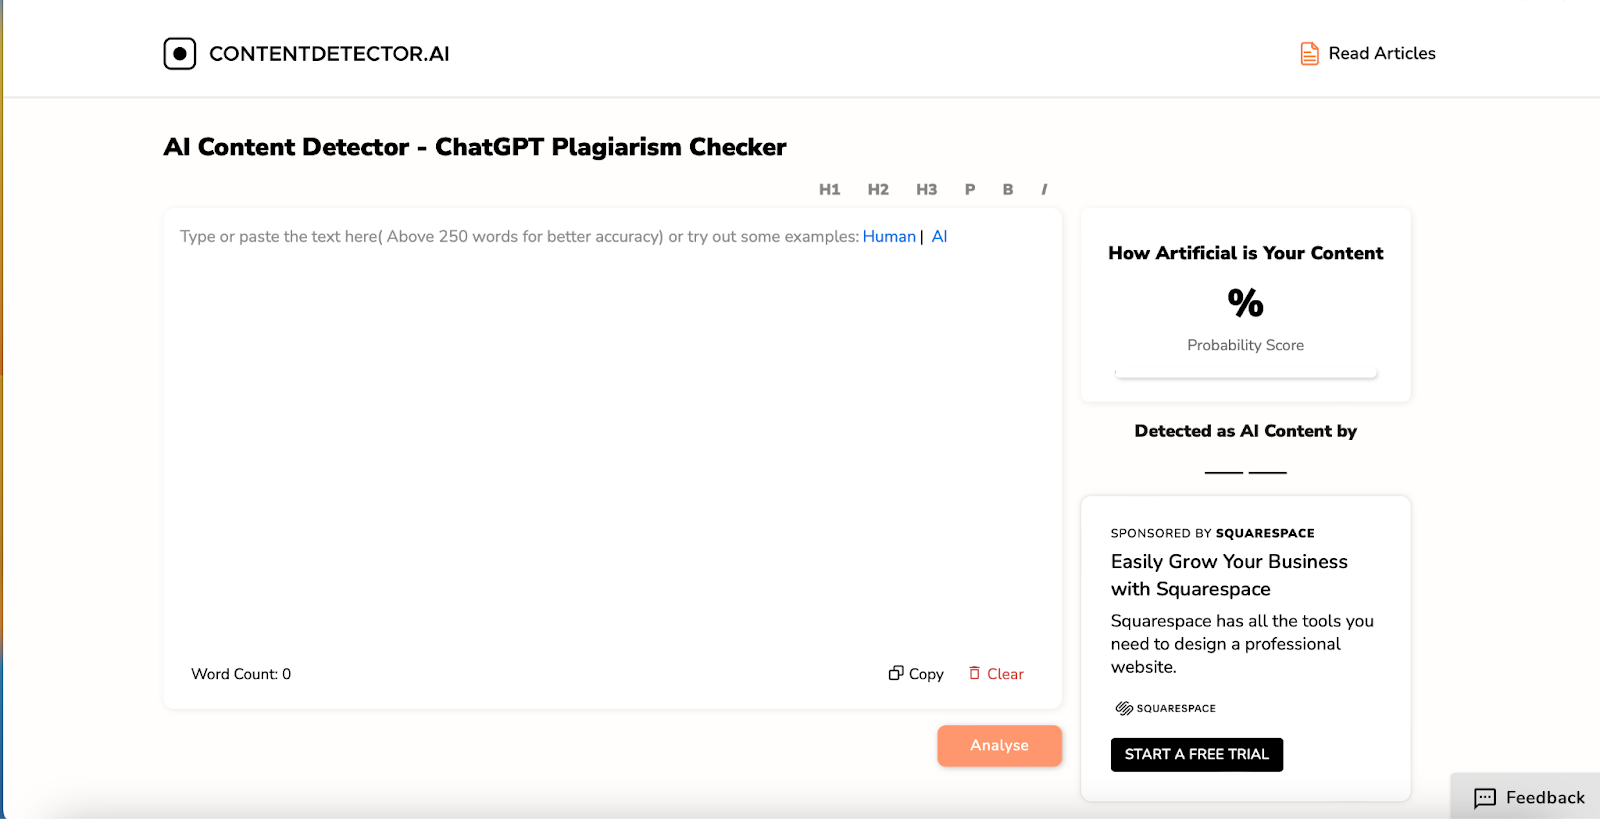 The AI Content Detector that acts as a ChatGPT plagiarism checker.